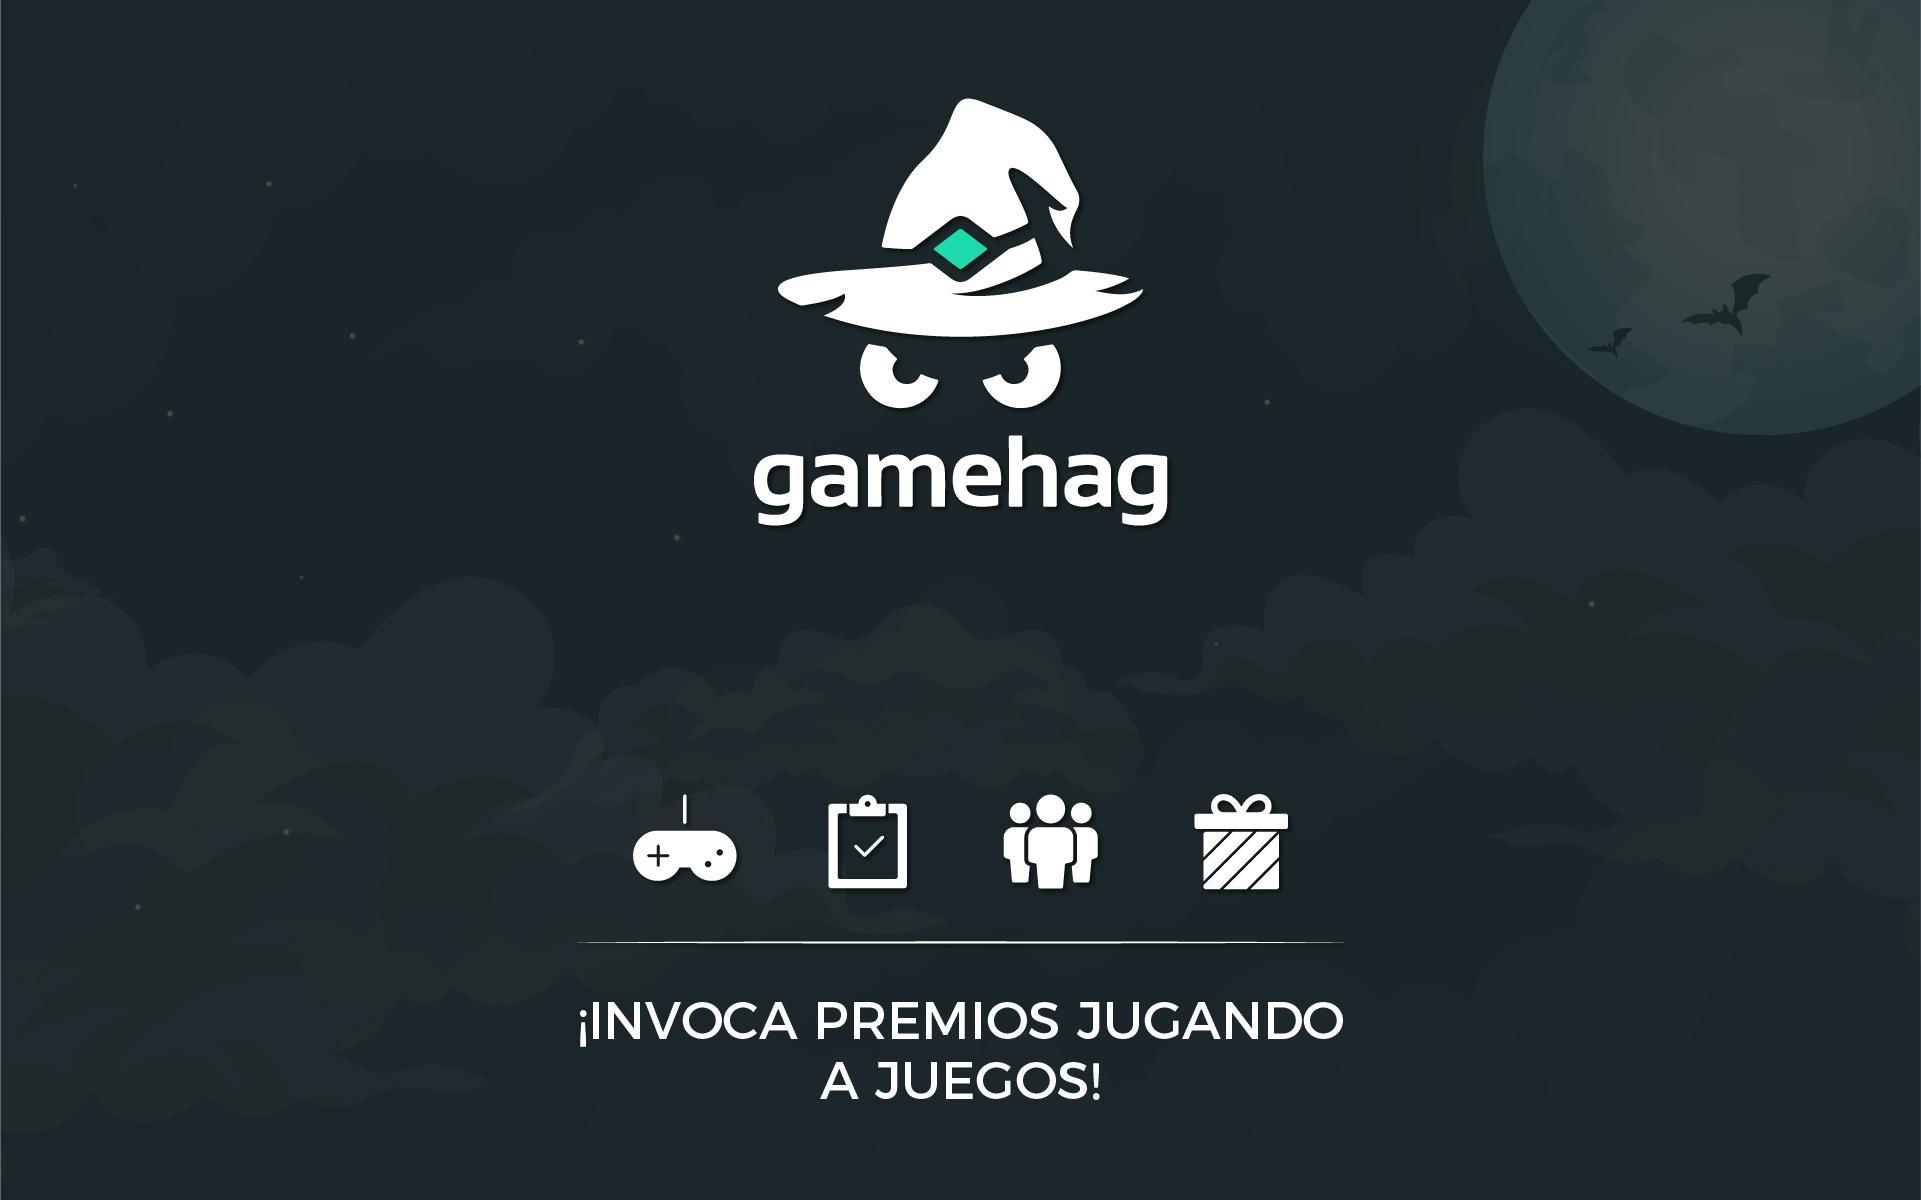 Gamehag for Android - APK Download